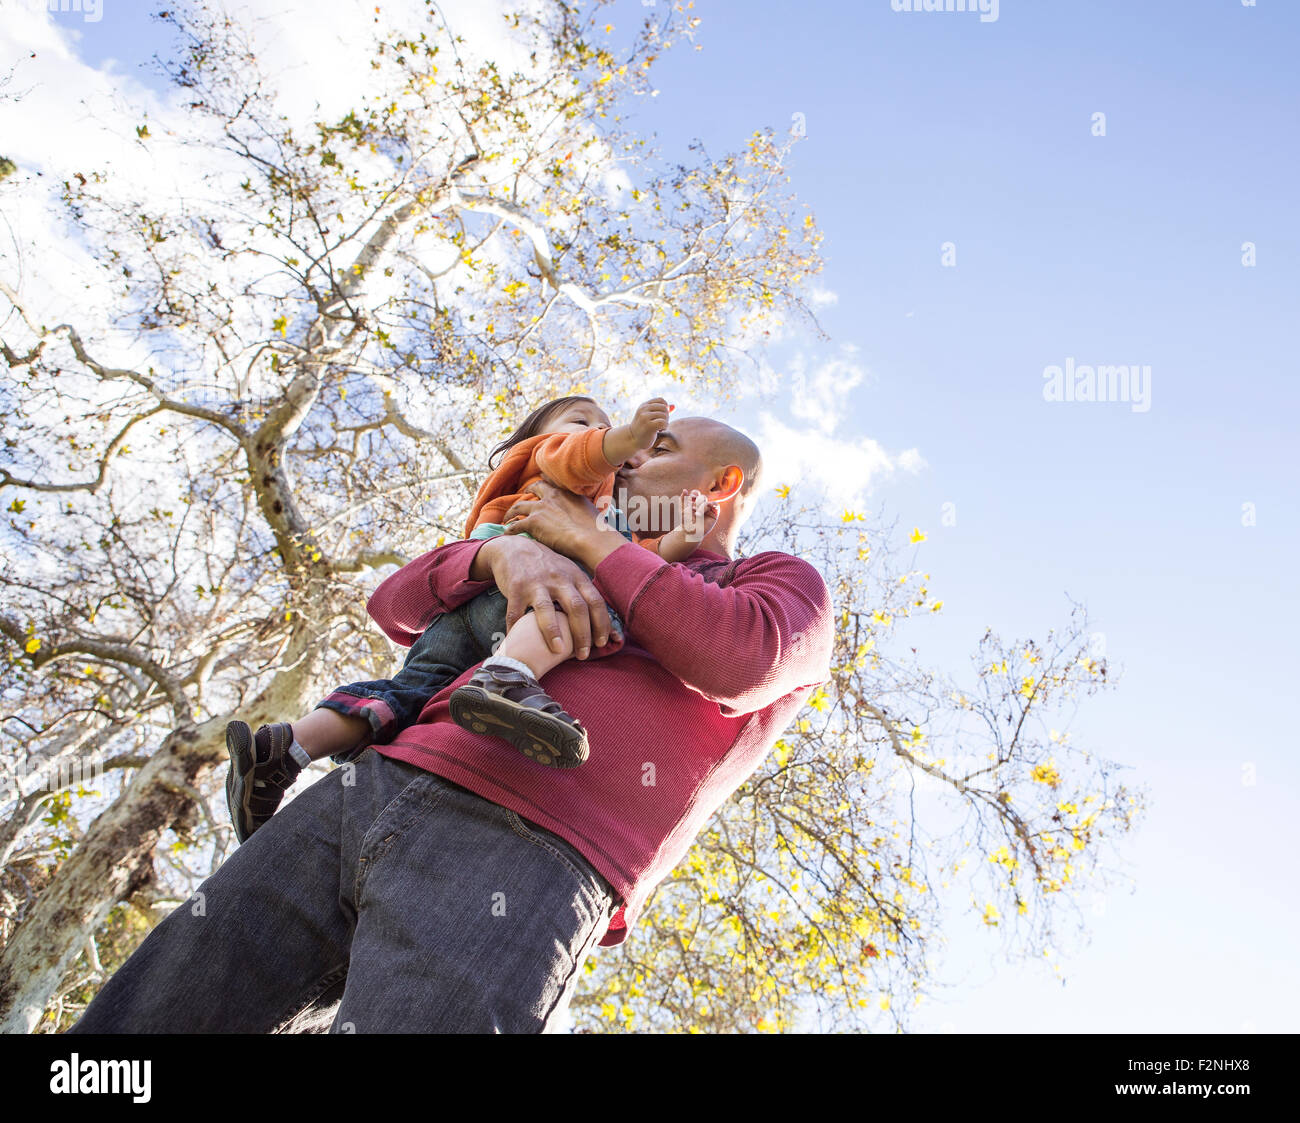 Low angle view of Hispanic father kissing son outdoors Stock Photo